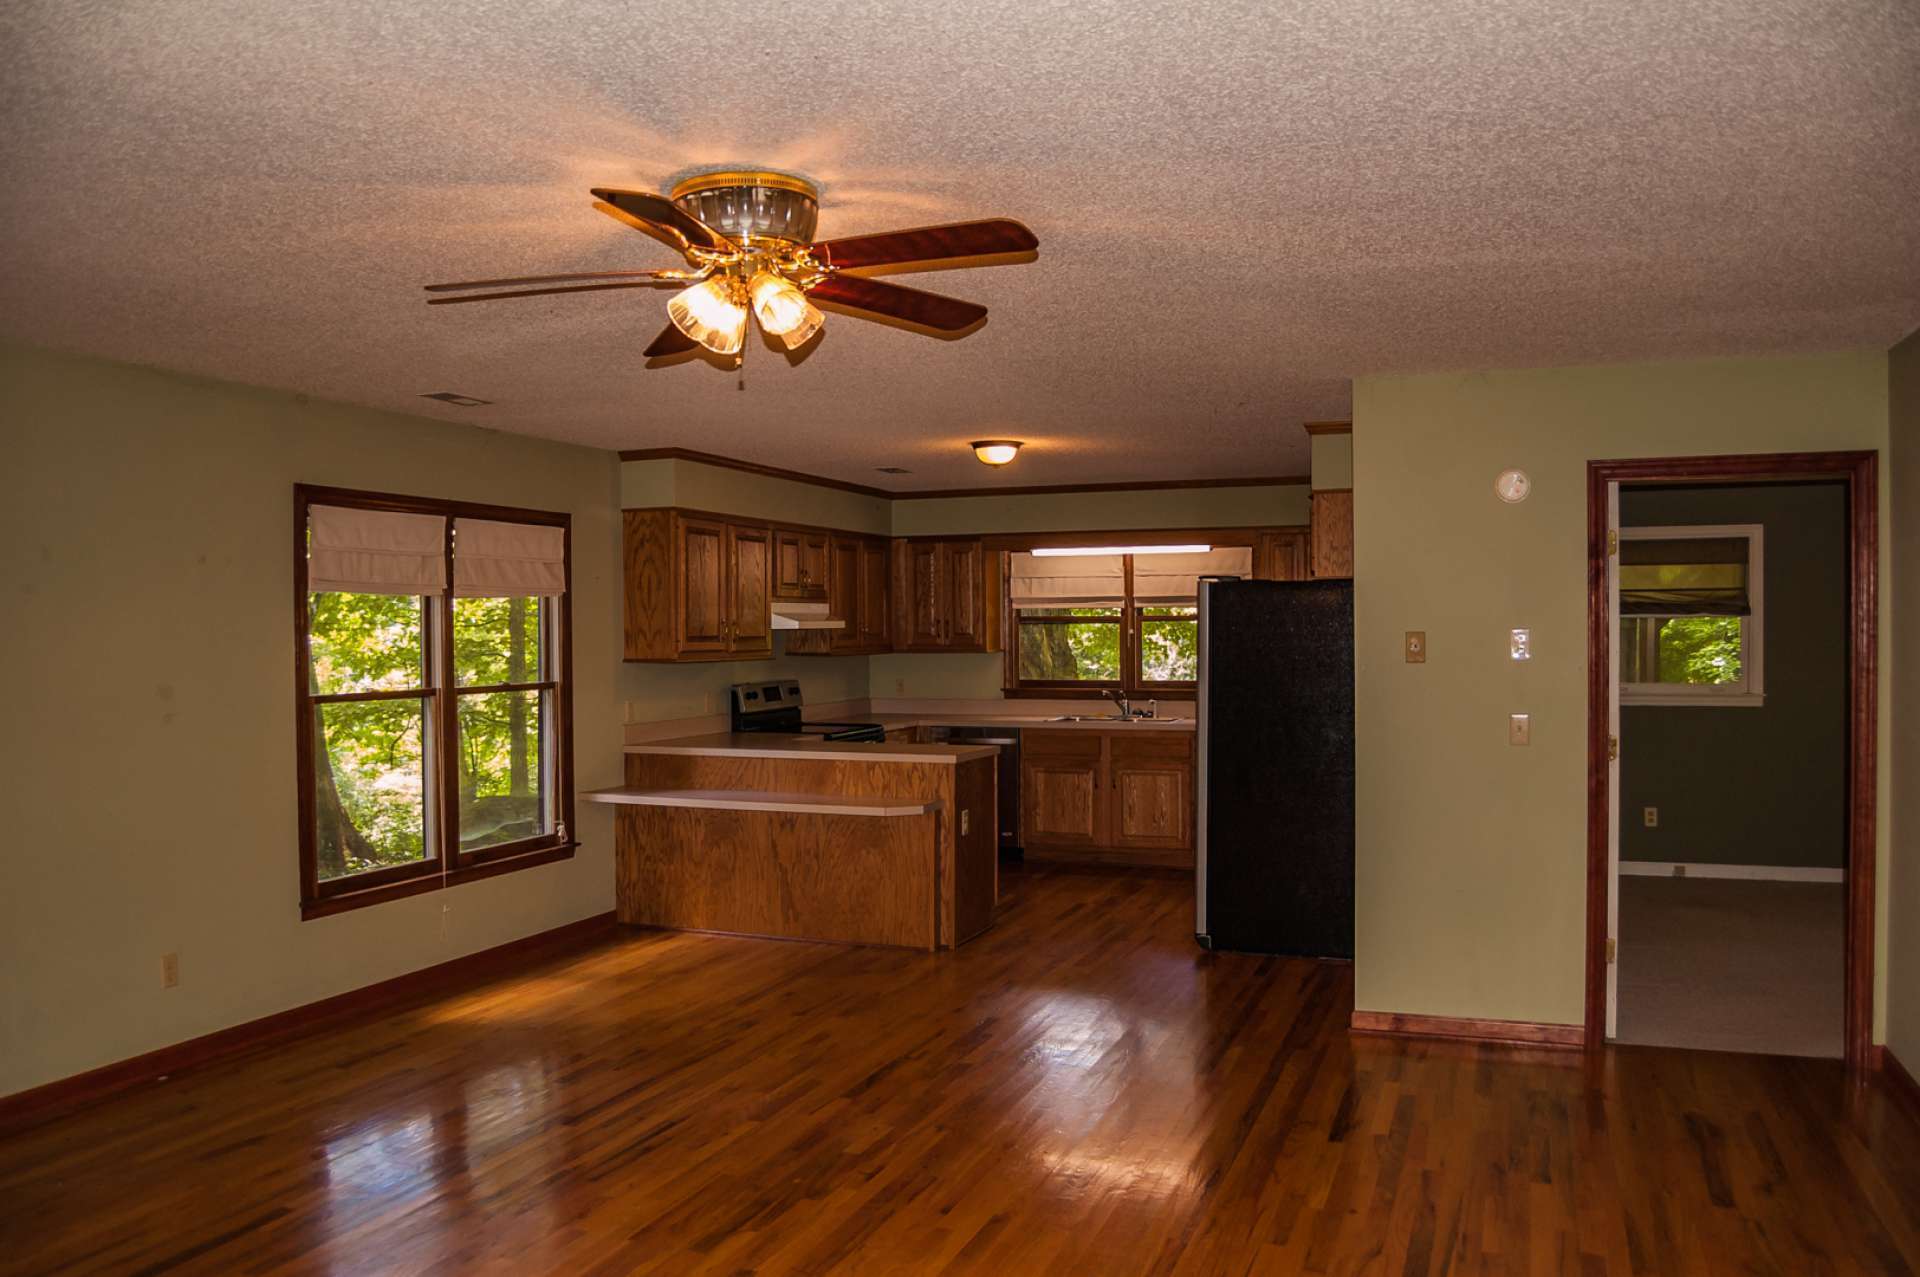 Open to the kitchen and living area, the dining area  has plenty of space for entertaining family and friends and  still cozy for an intimate dinner for two.